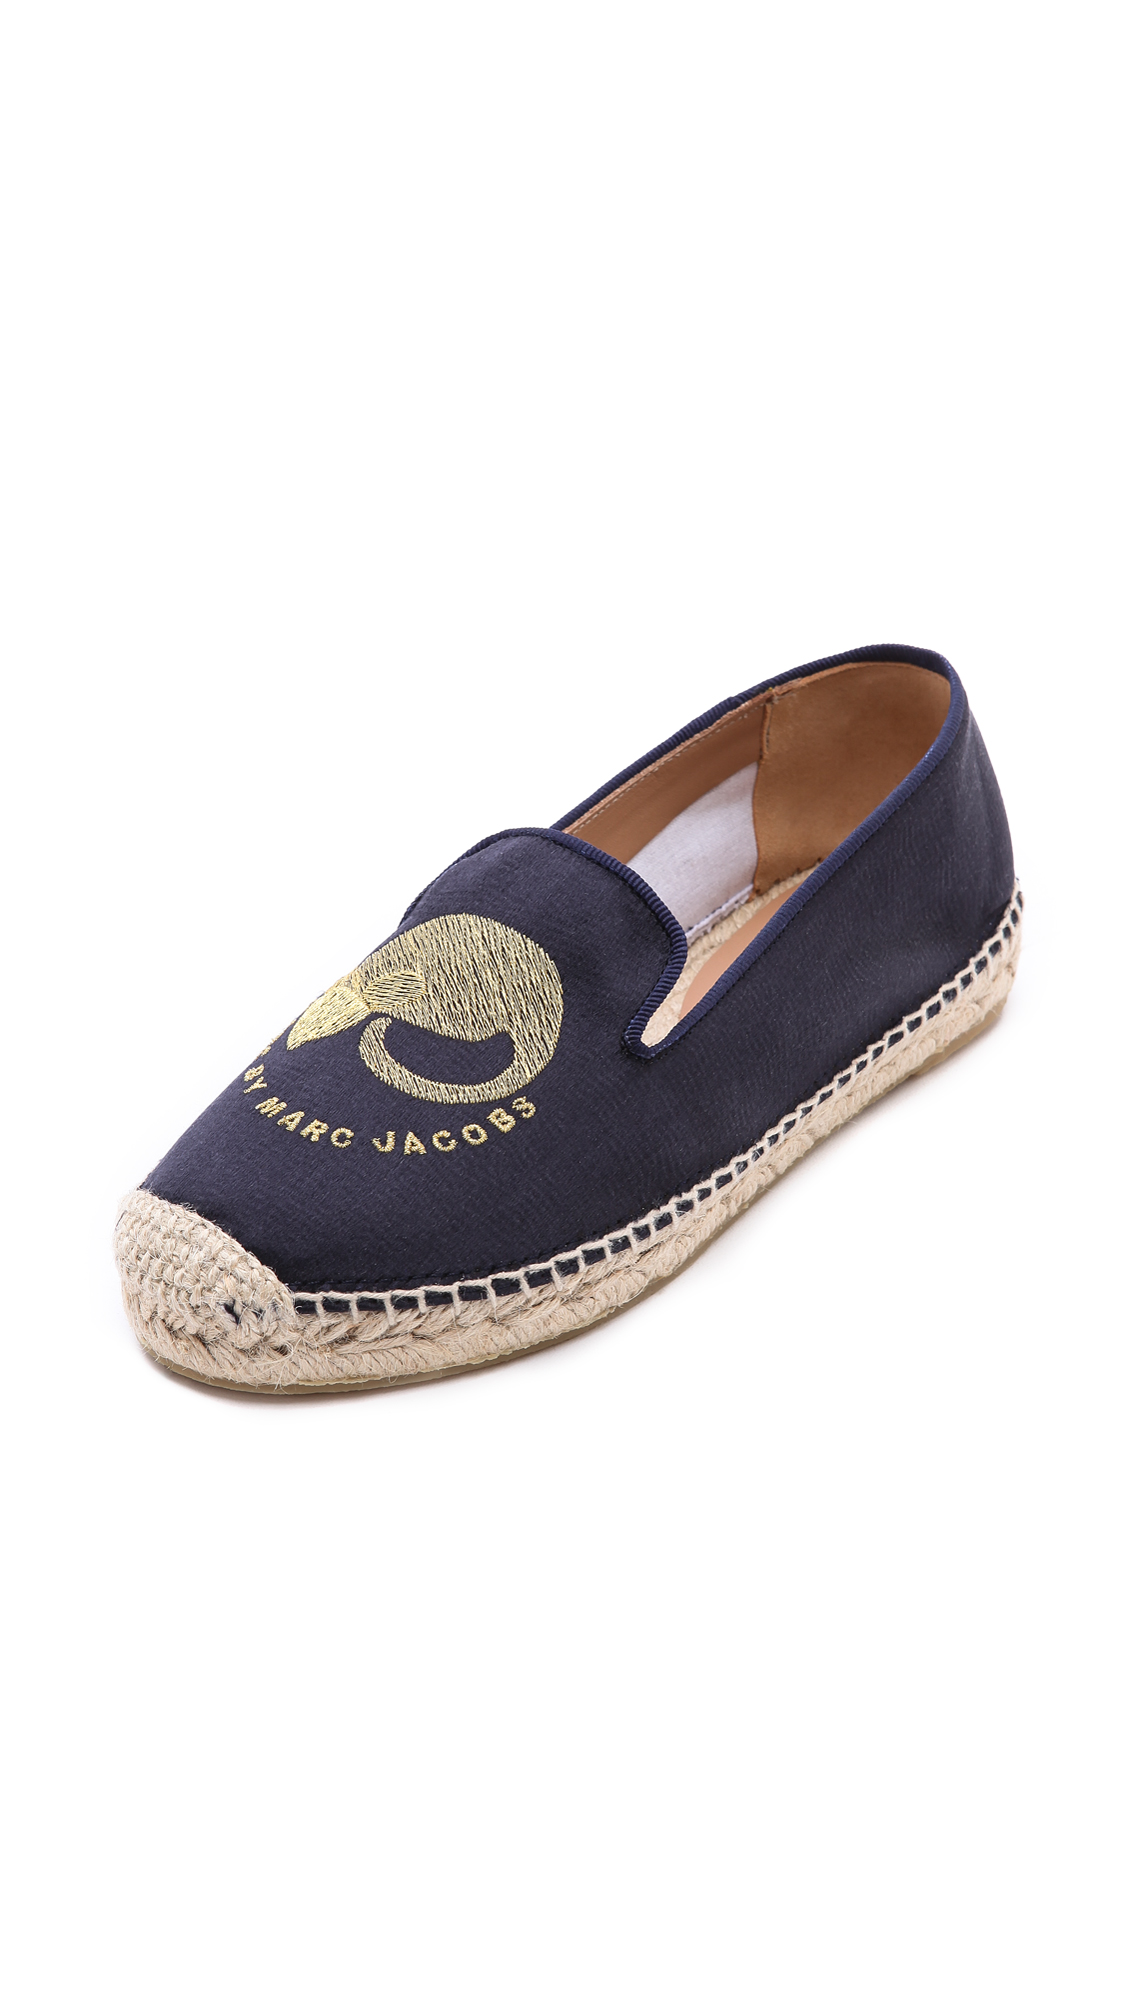 Marc By Marc Jacobs Sleeping Mouse Espadrilles in Navy (Blue) - Lyst